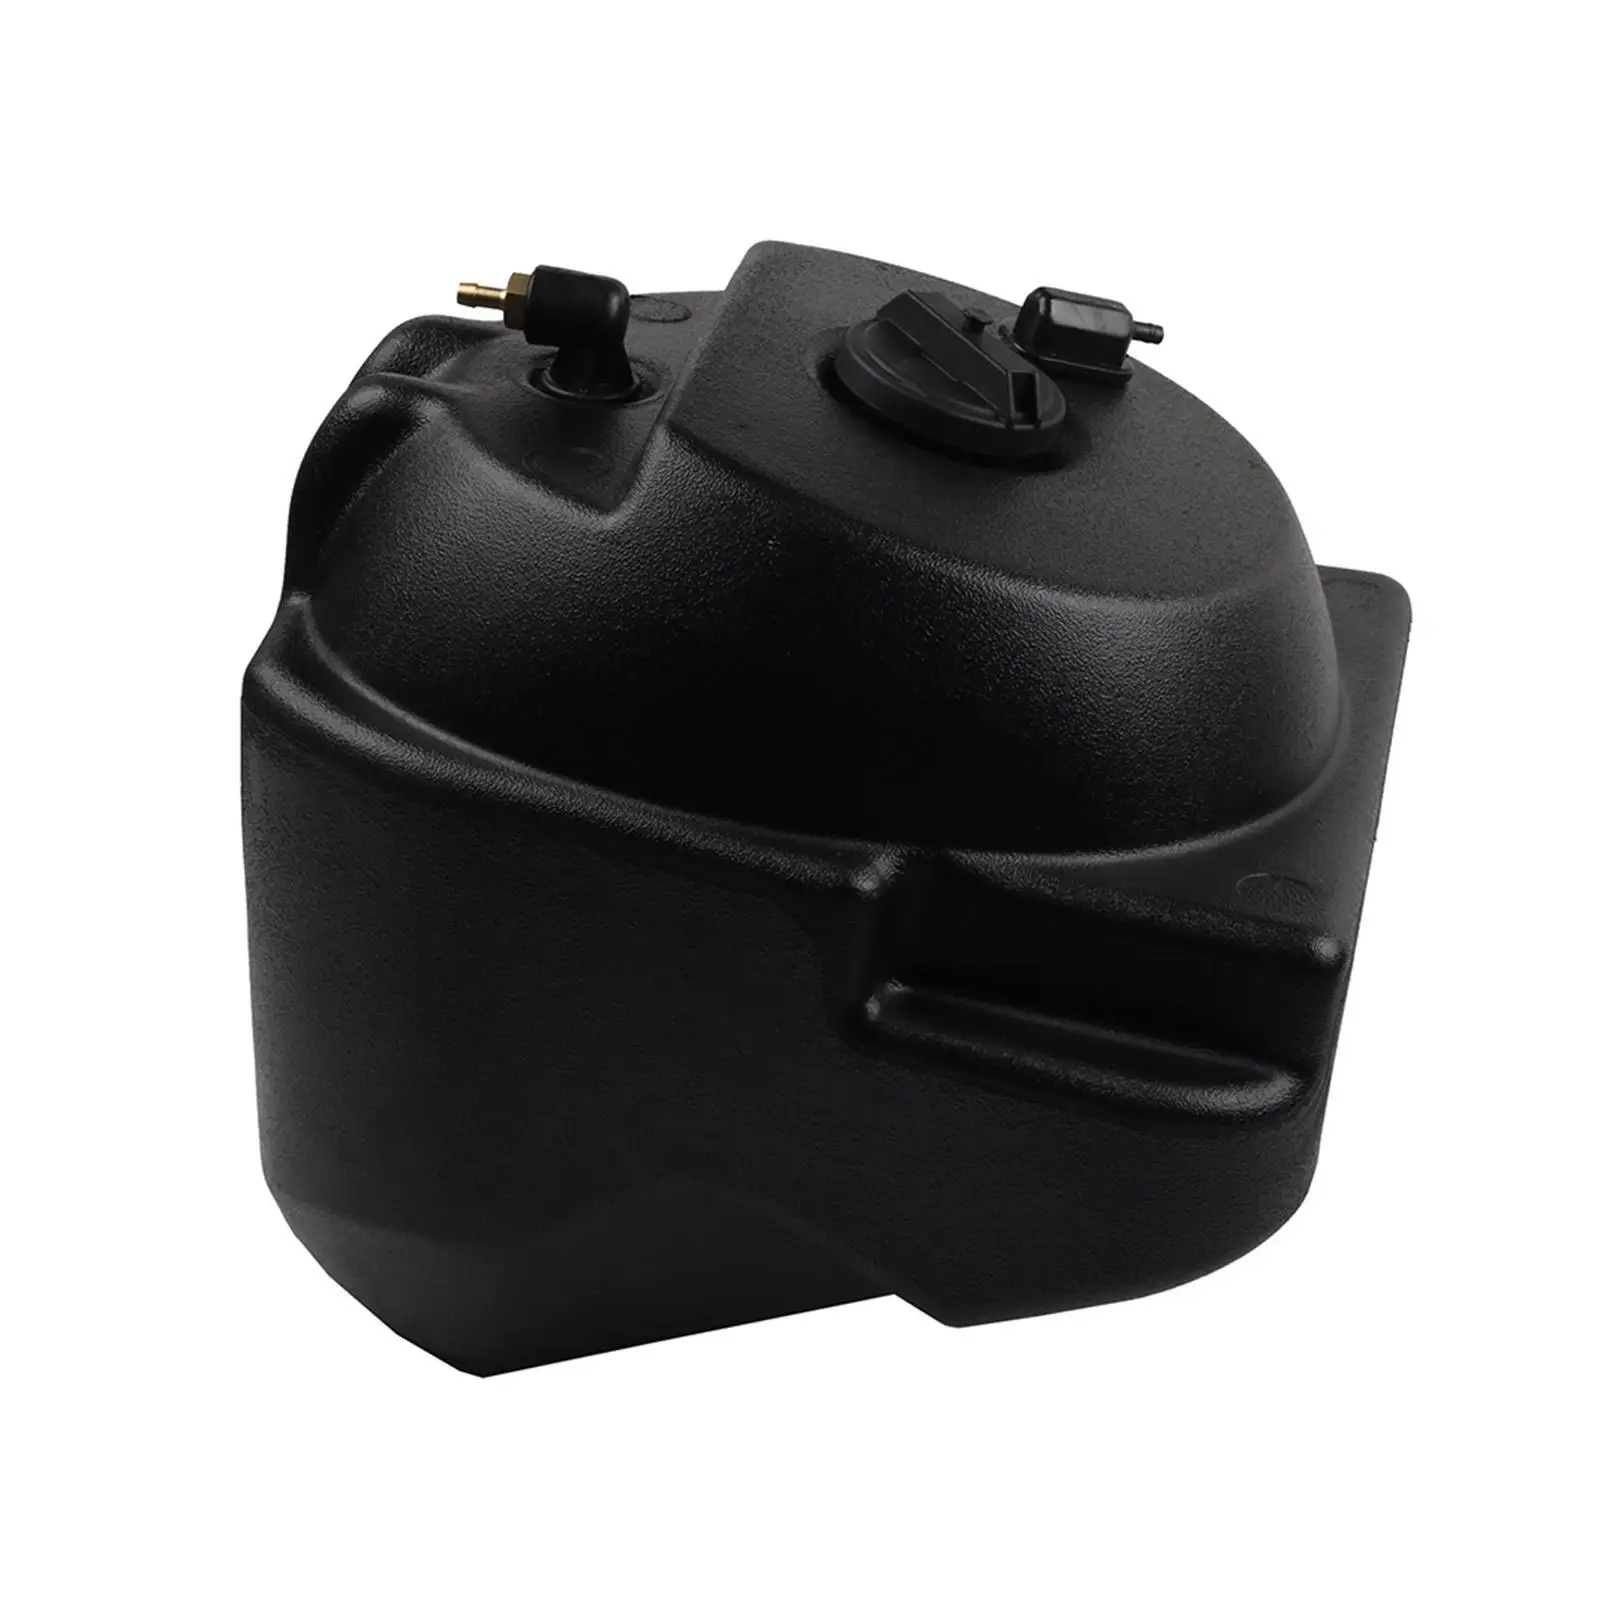 Black Auxiliary Fuel Tank Motorcycle Accessory Replaces Motorcycle Fuel Tank for